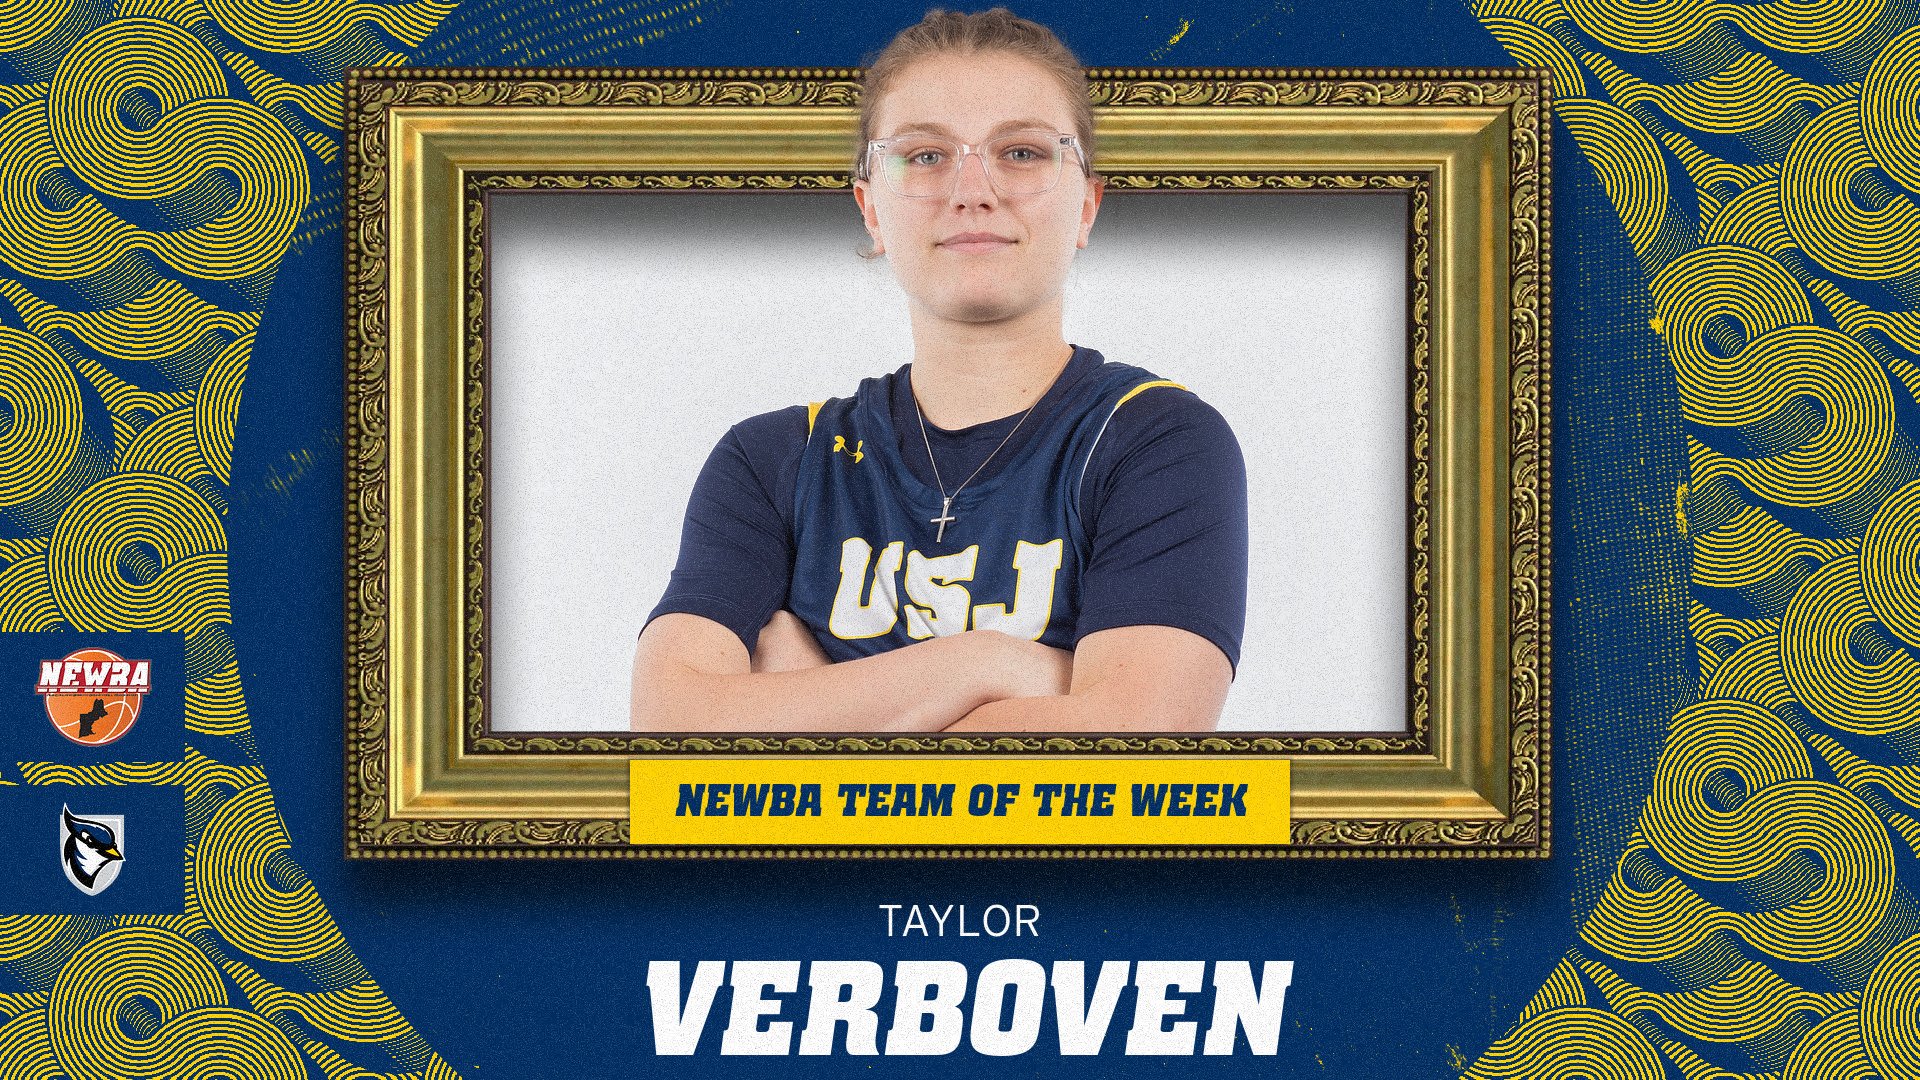 Verboven Named to NEWBA Team of the Week